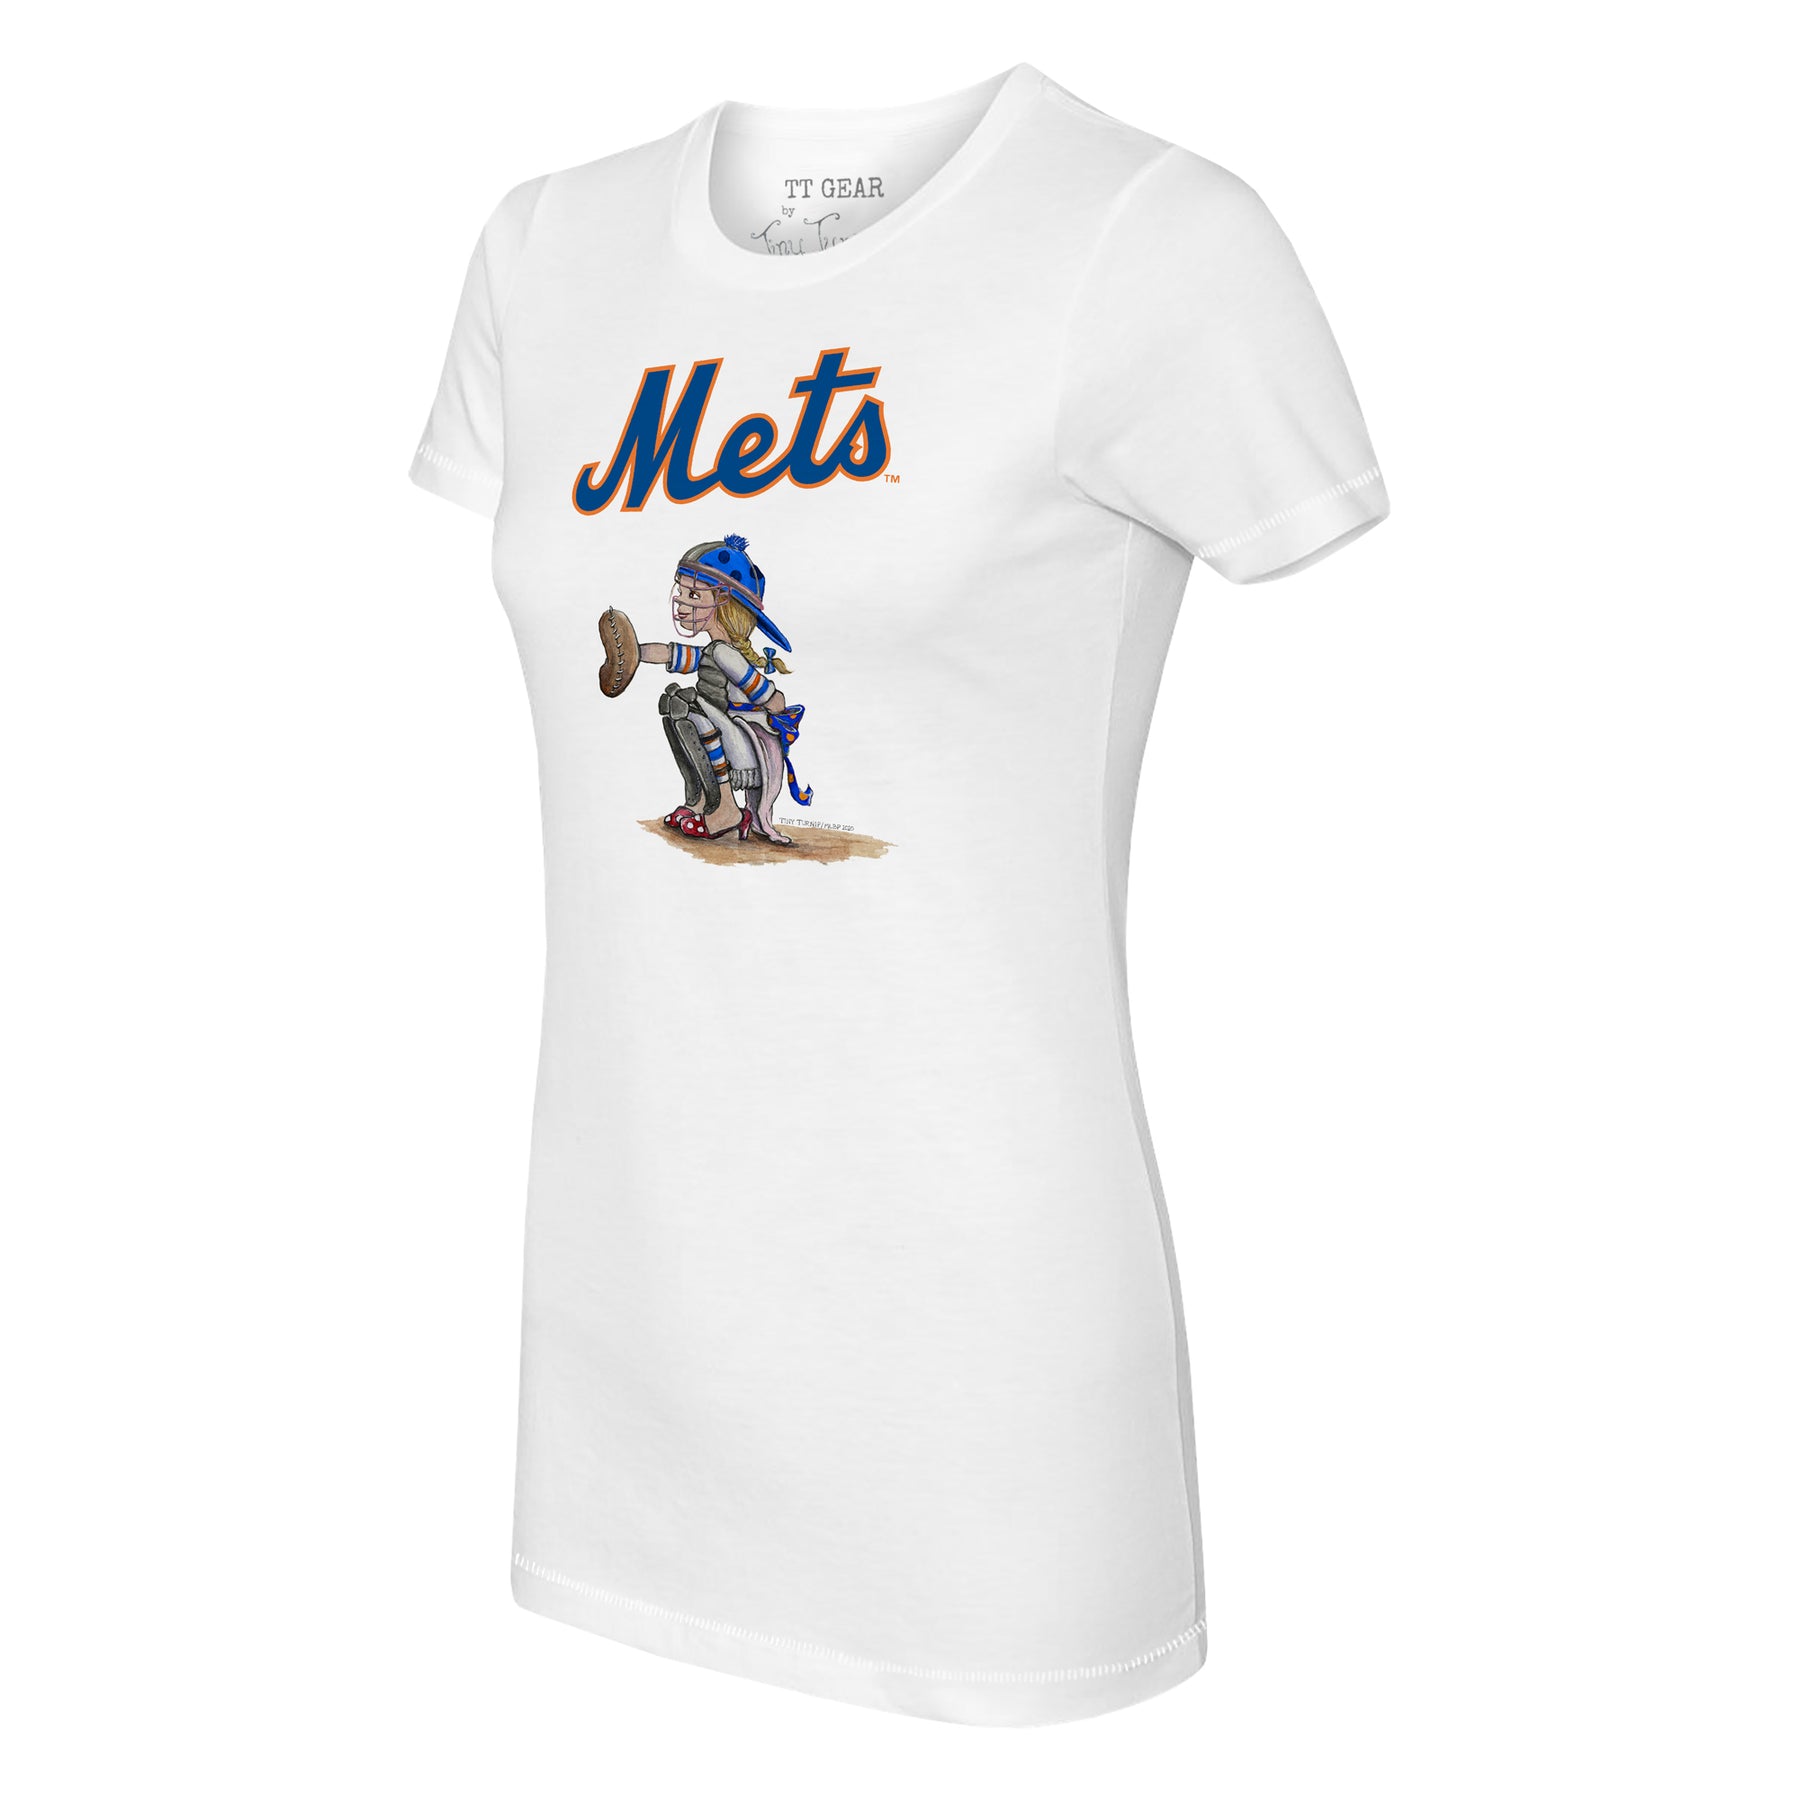 New York Mets Kate The Catcher Tee Shirt Youth XL (12-14) / White